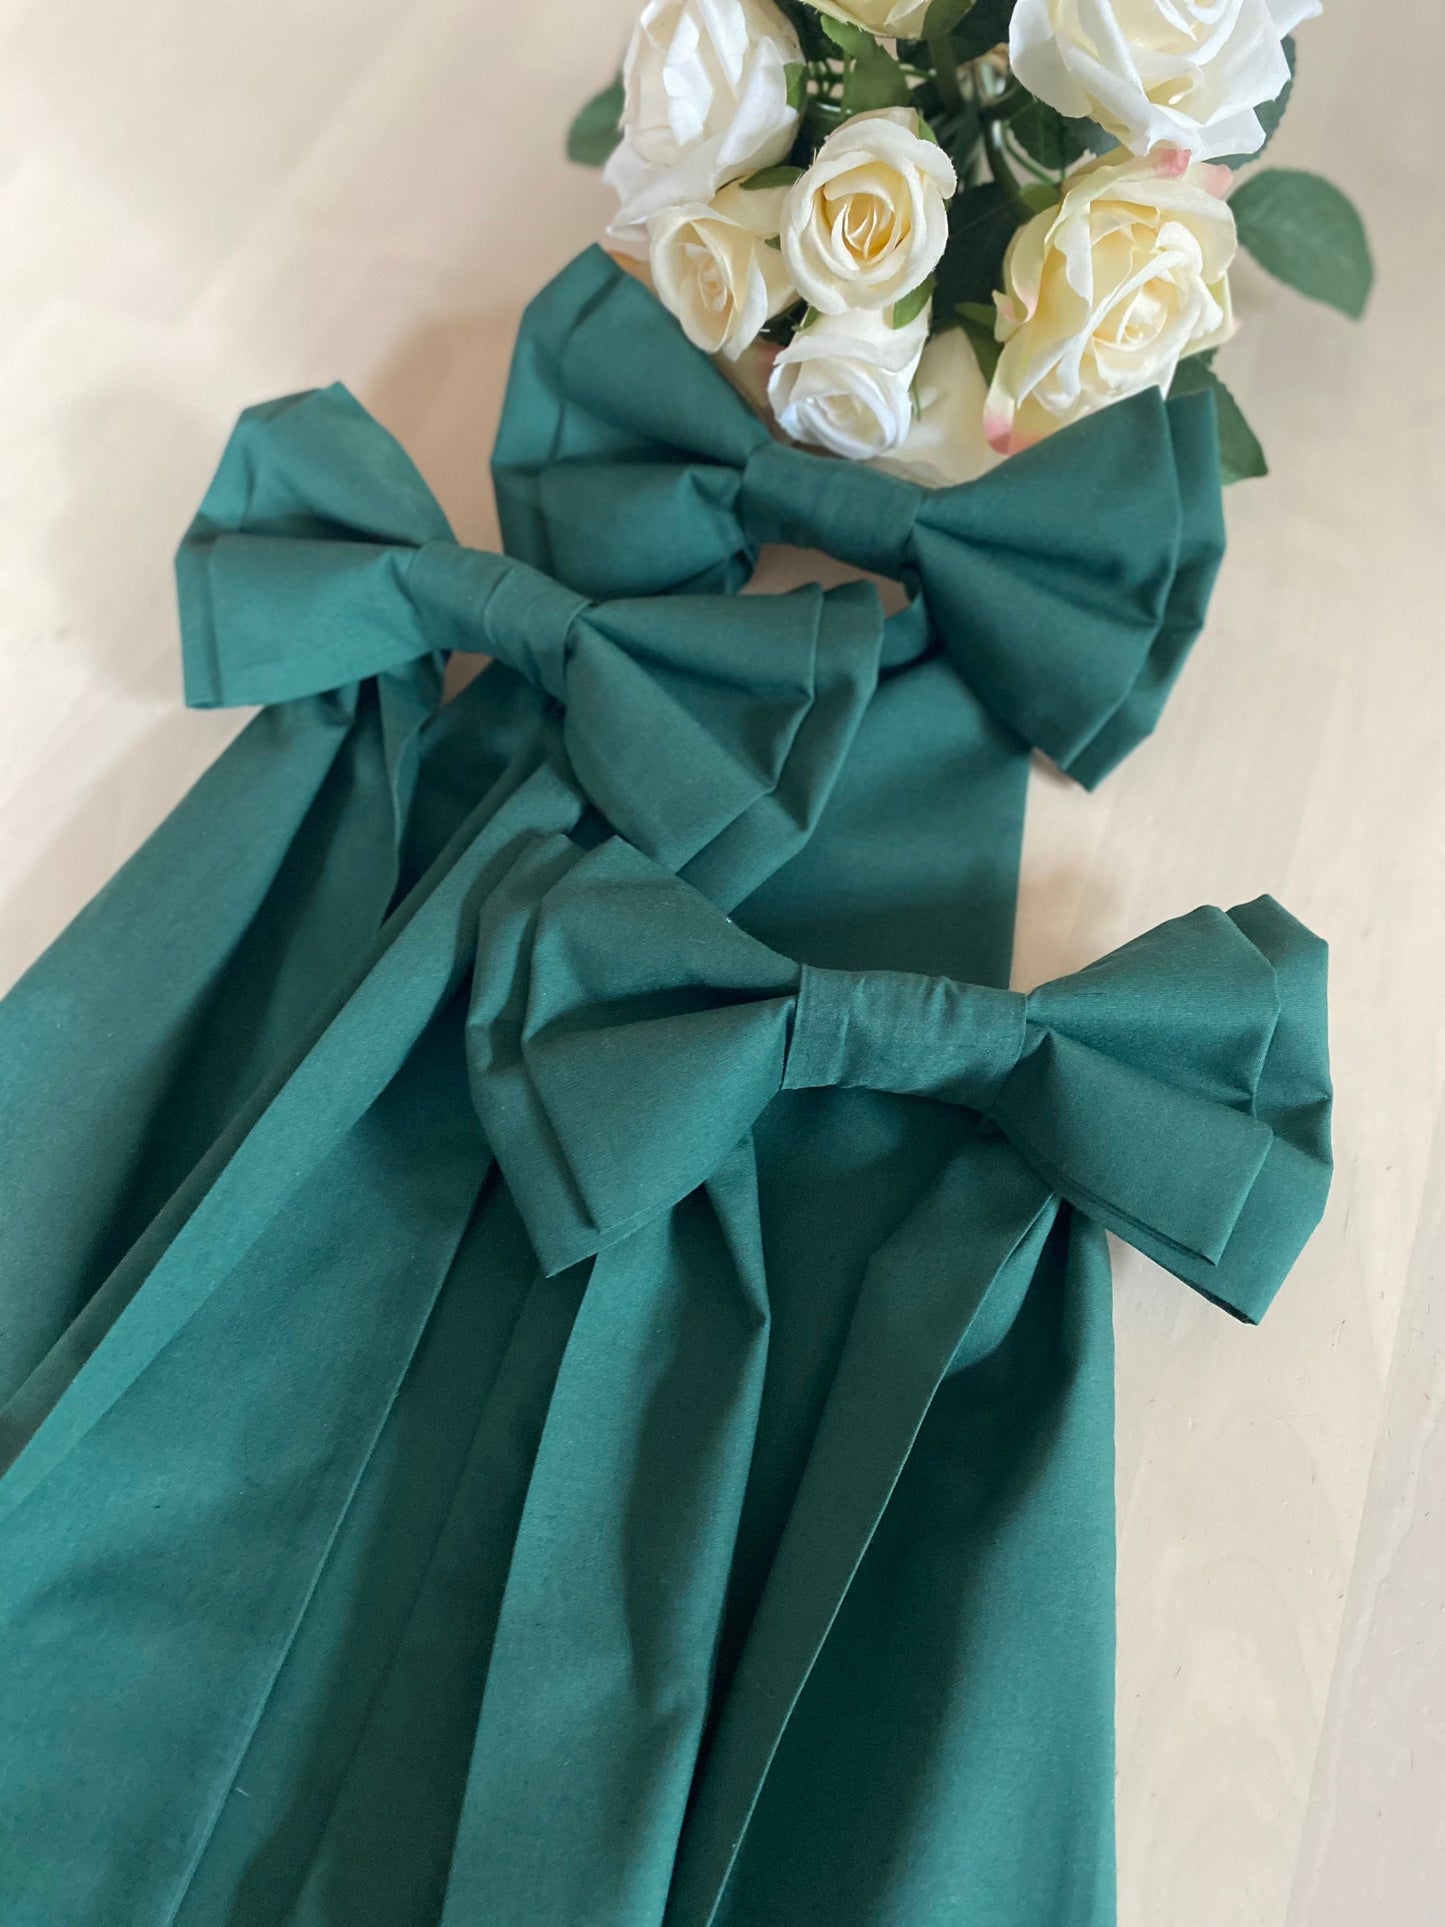 Green Picture Bow